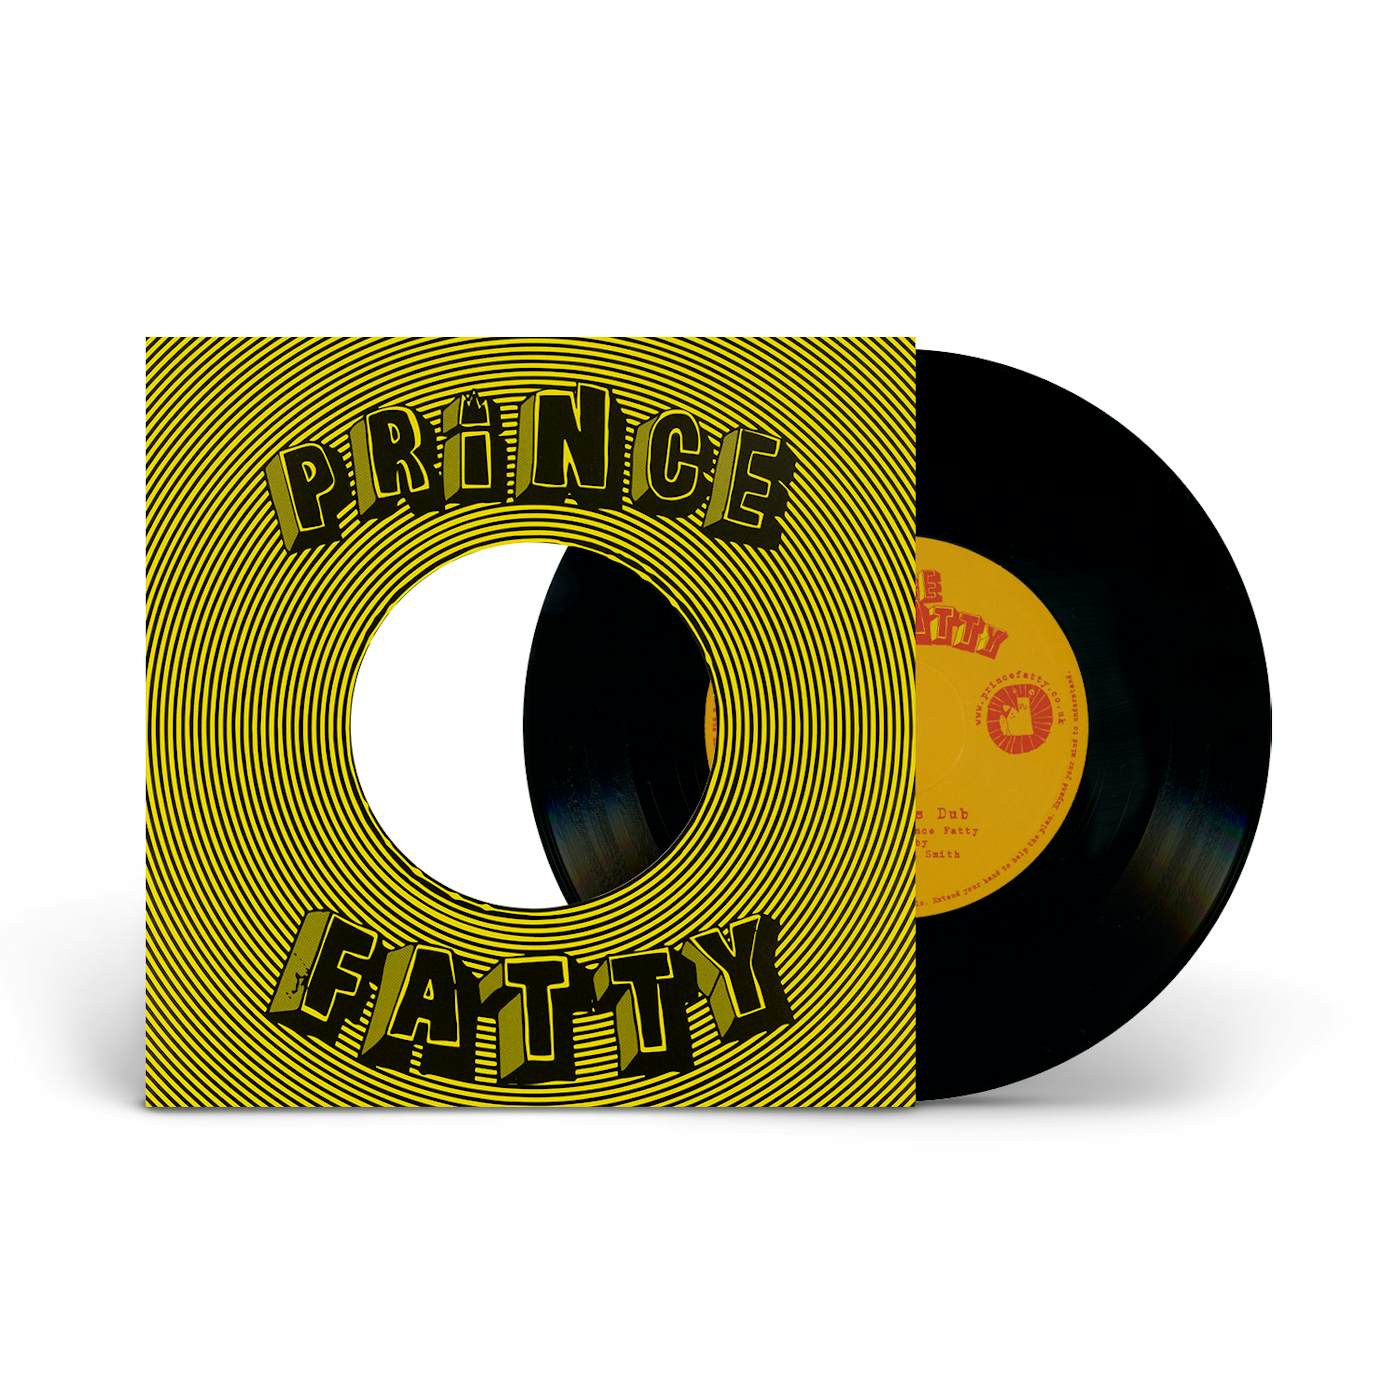 Prince Fatty feat. Shniece – Expansions 7” Vinyl Single